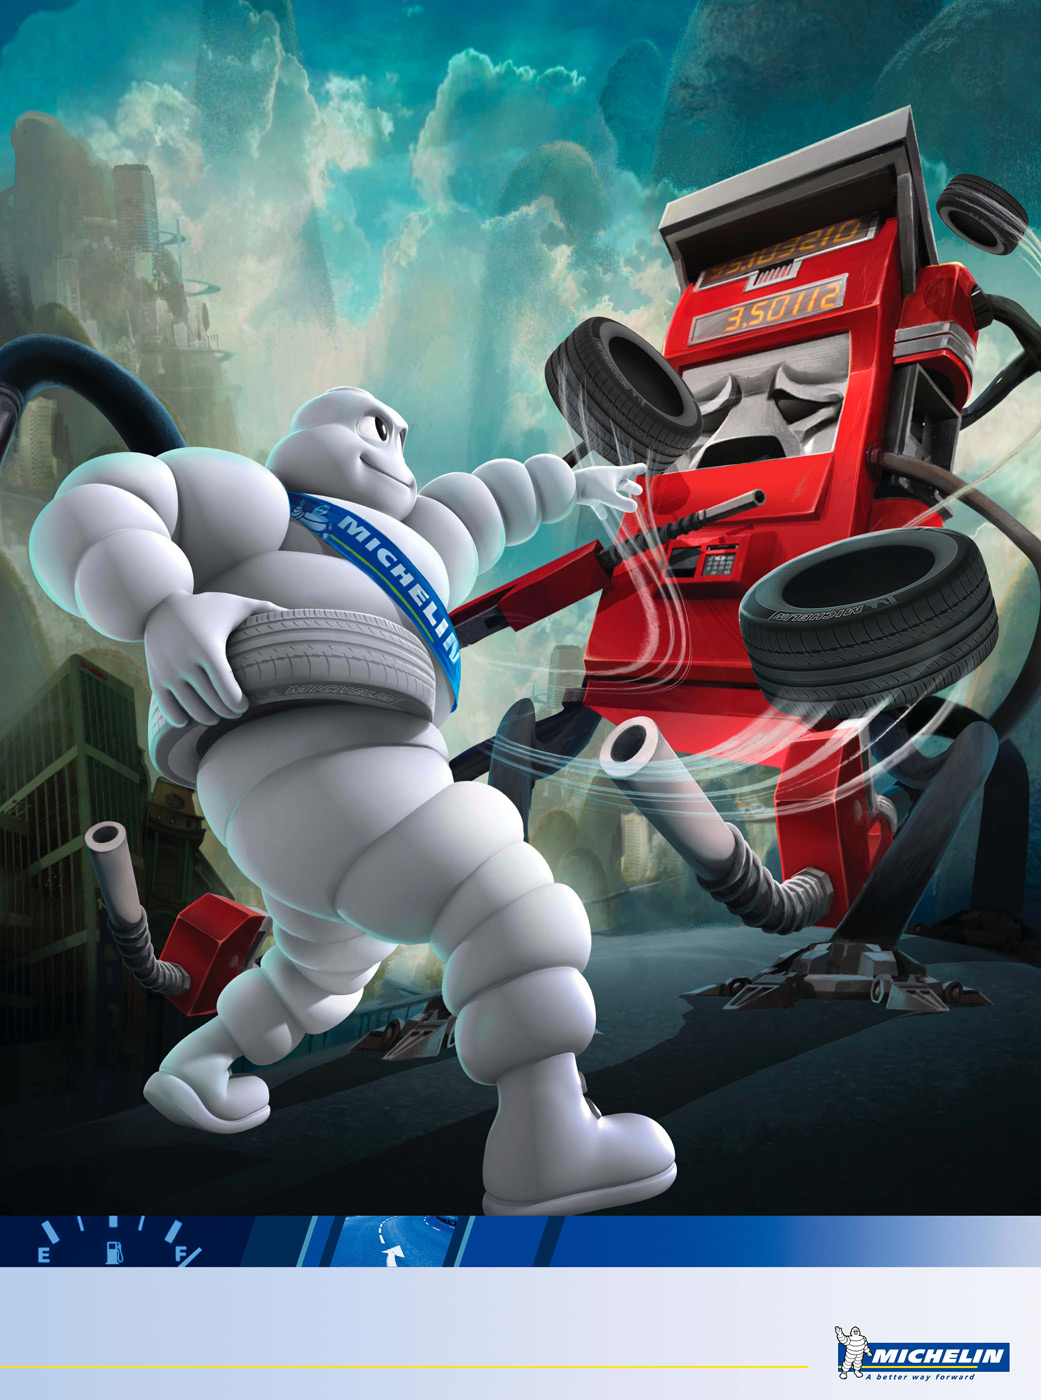 Michelin-Save-on-fuel-Print-Ad-2